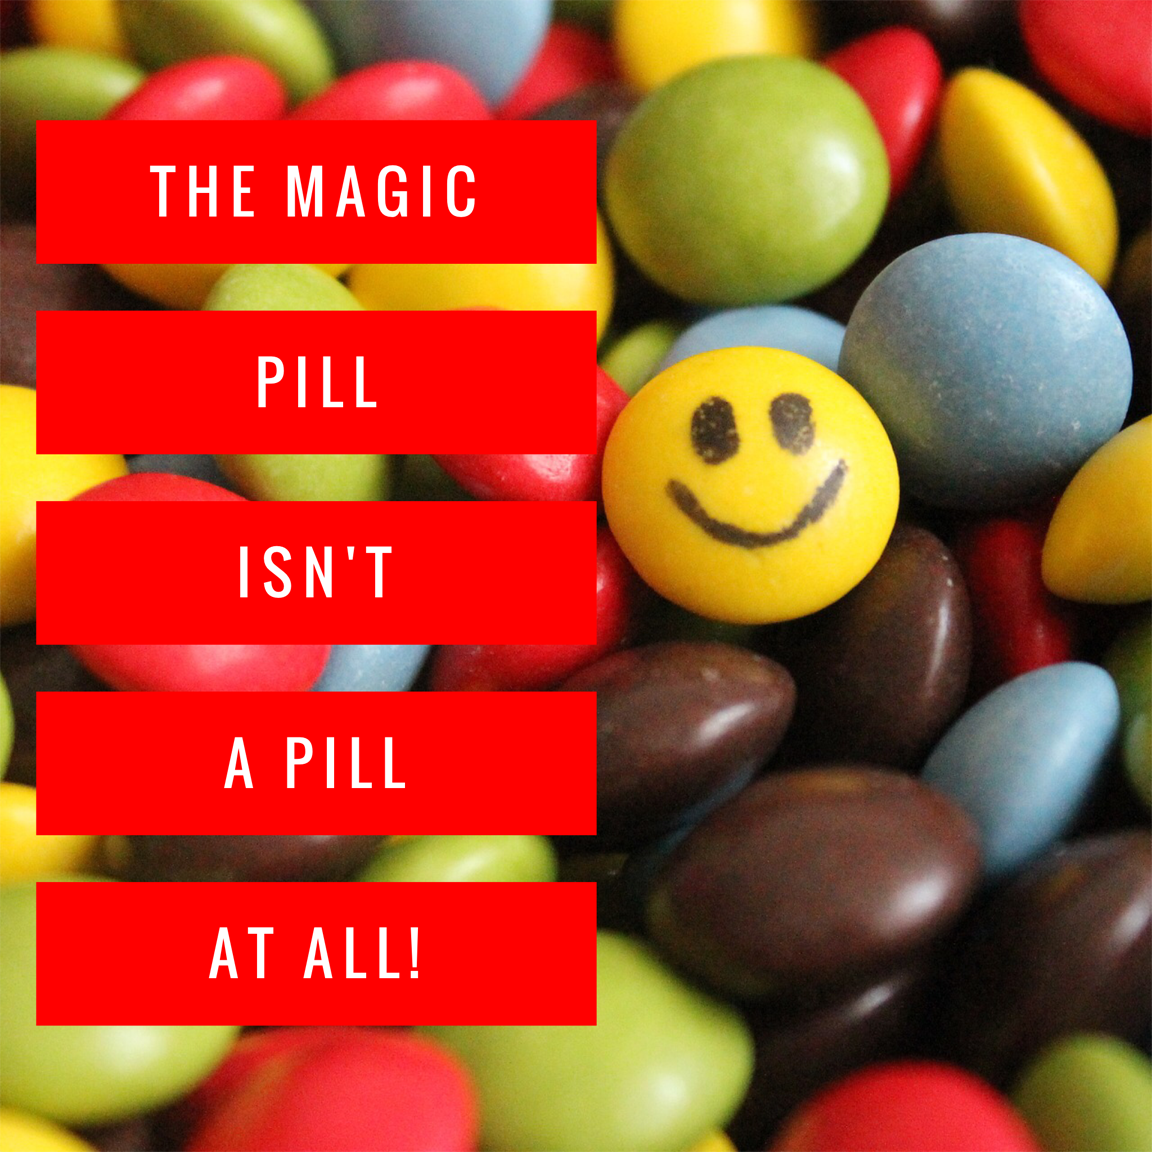 The Magic Pill to Happiness is not a Pill